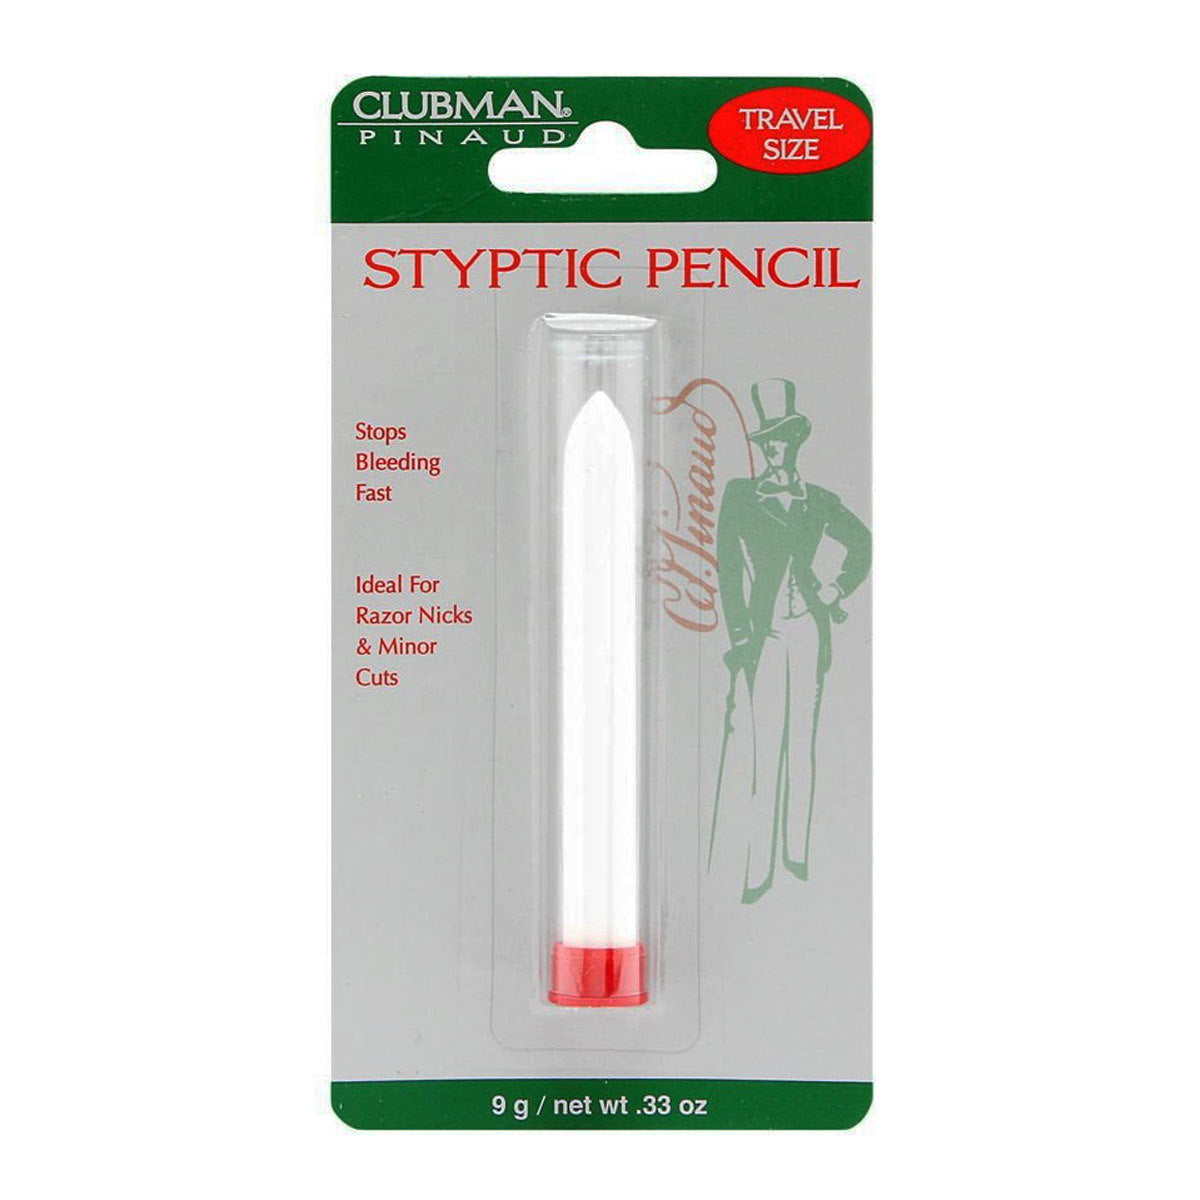 Primary image of Styptic Pencil